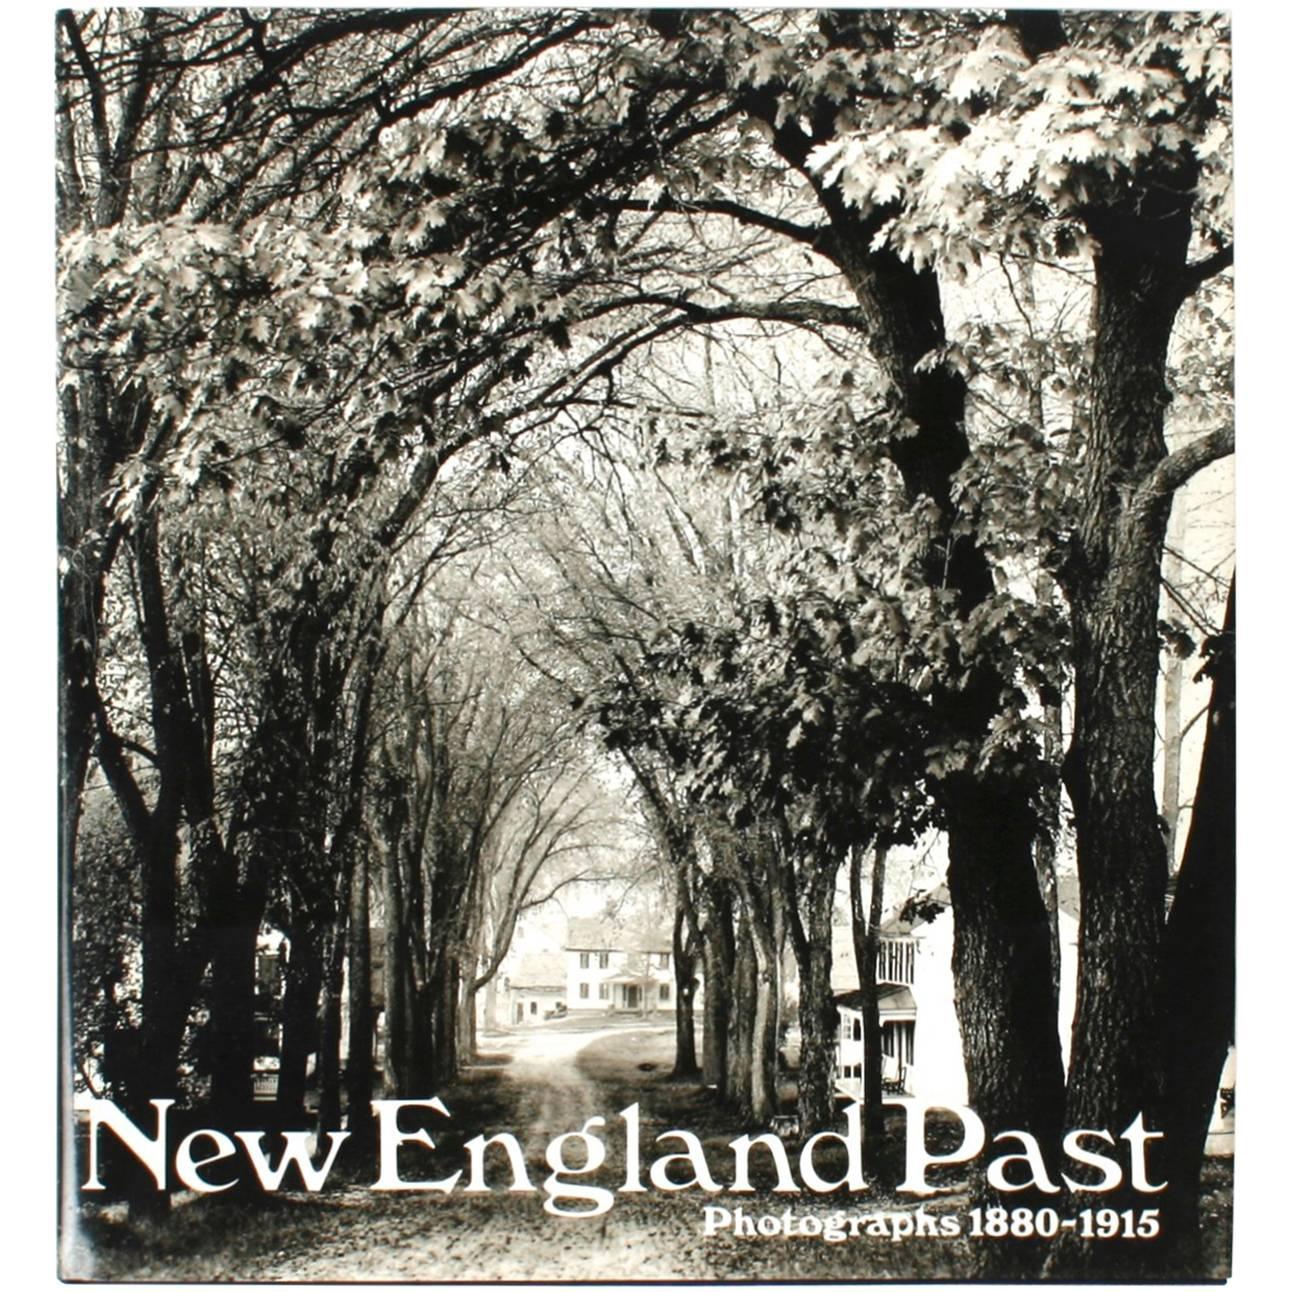 New England Past, First Edition by Norman Kotker